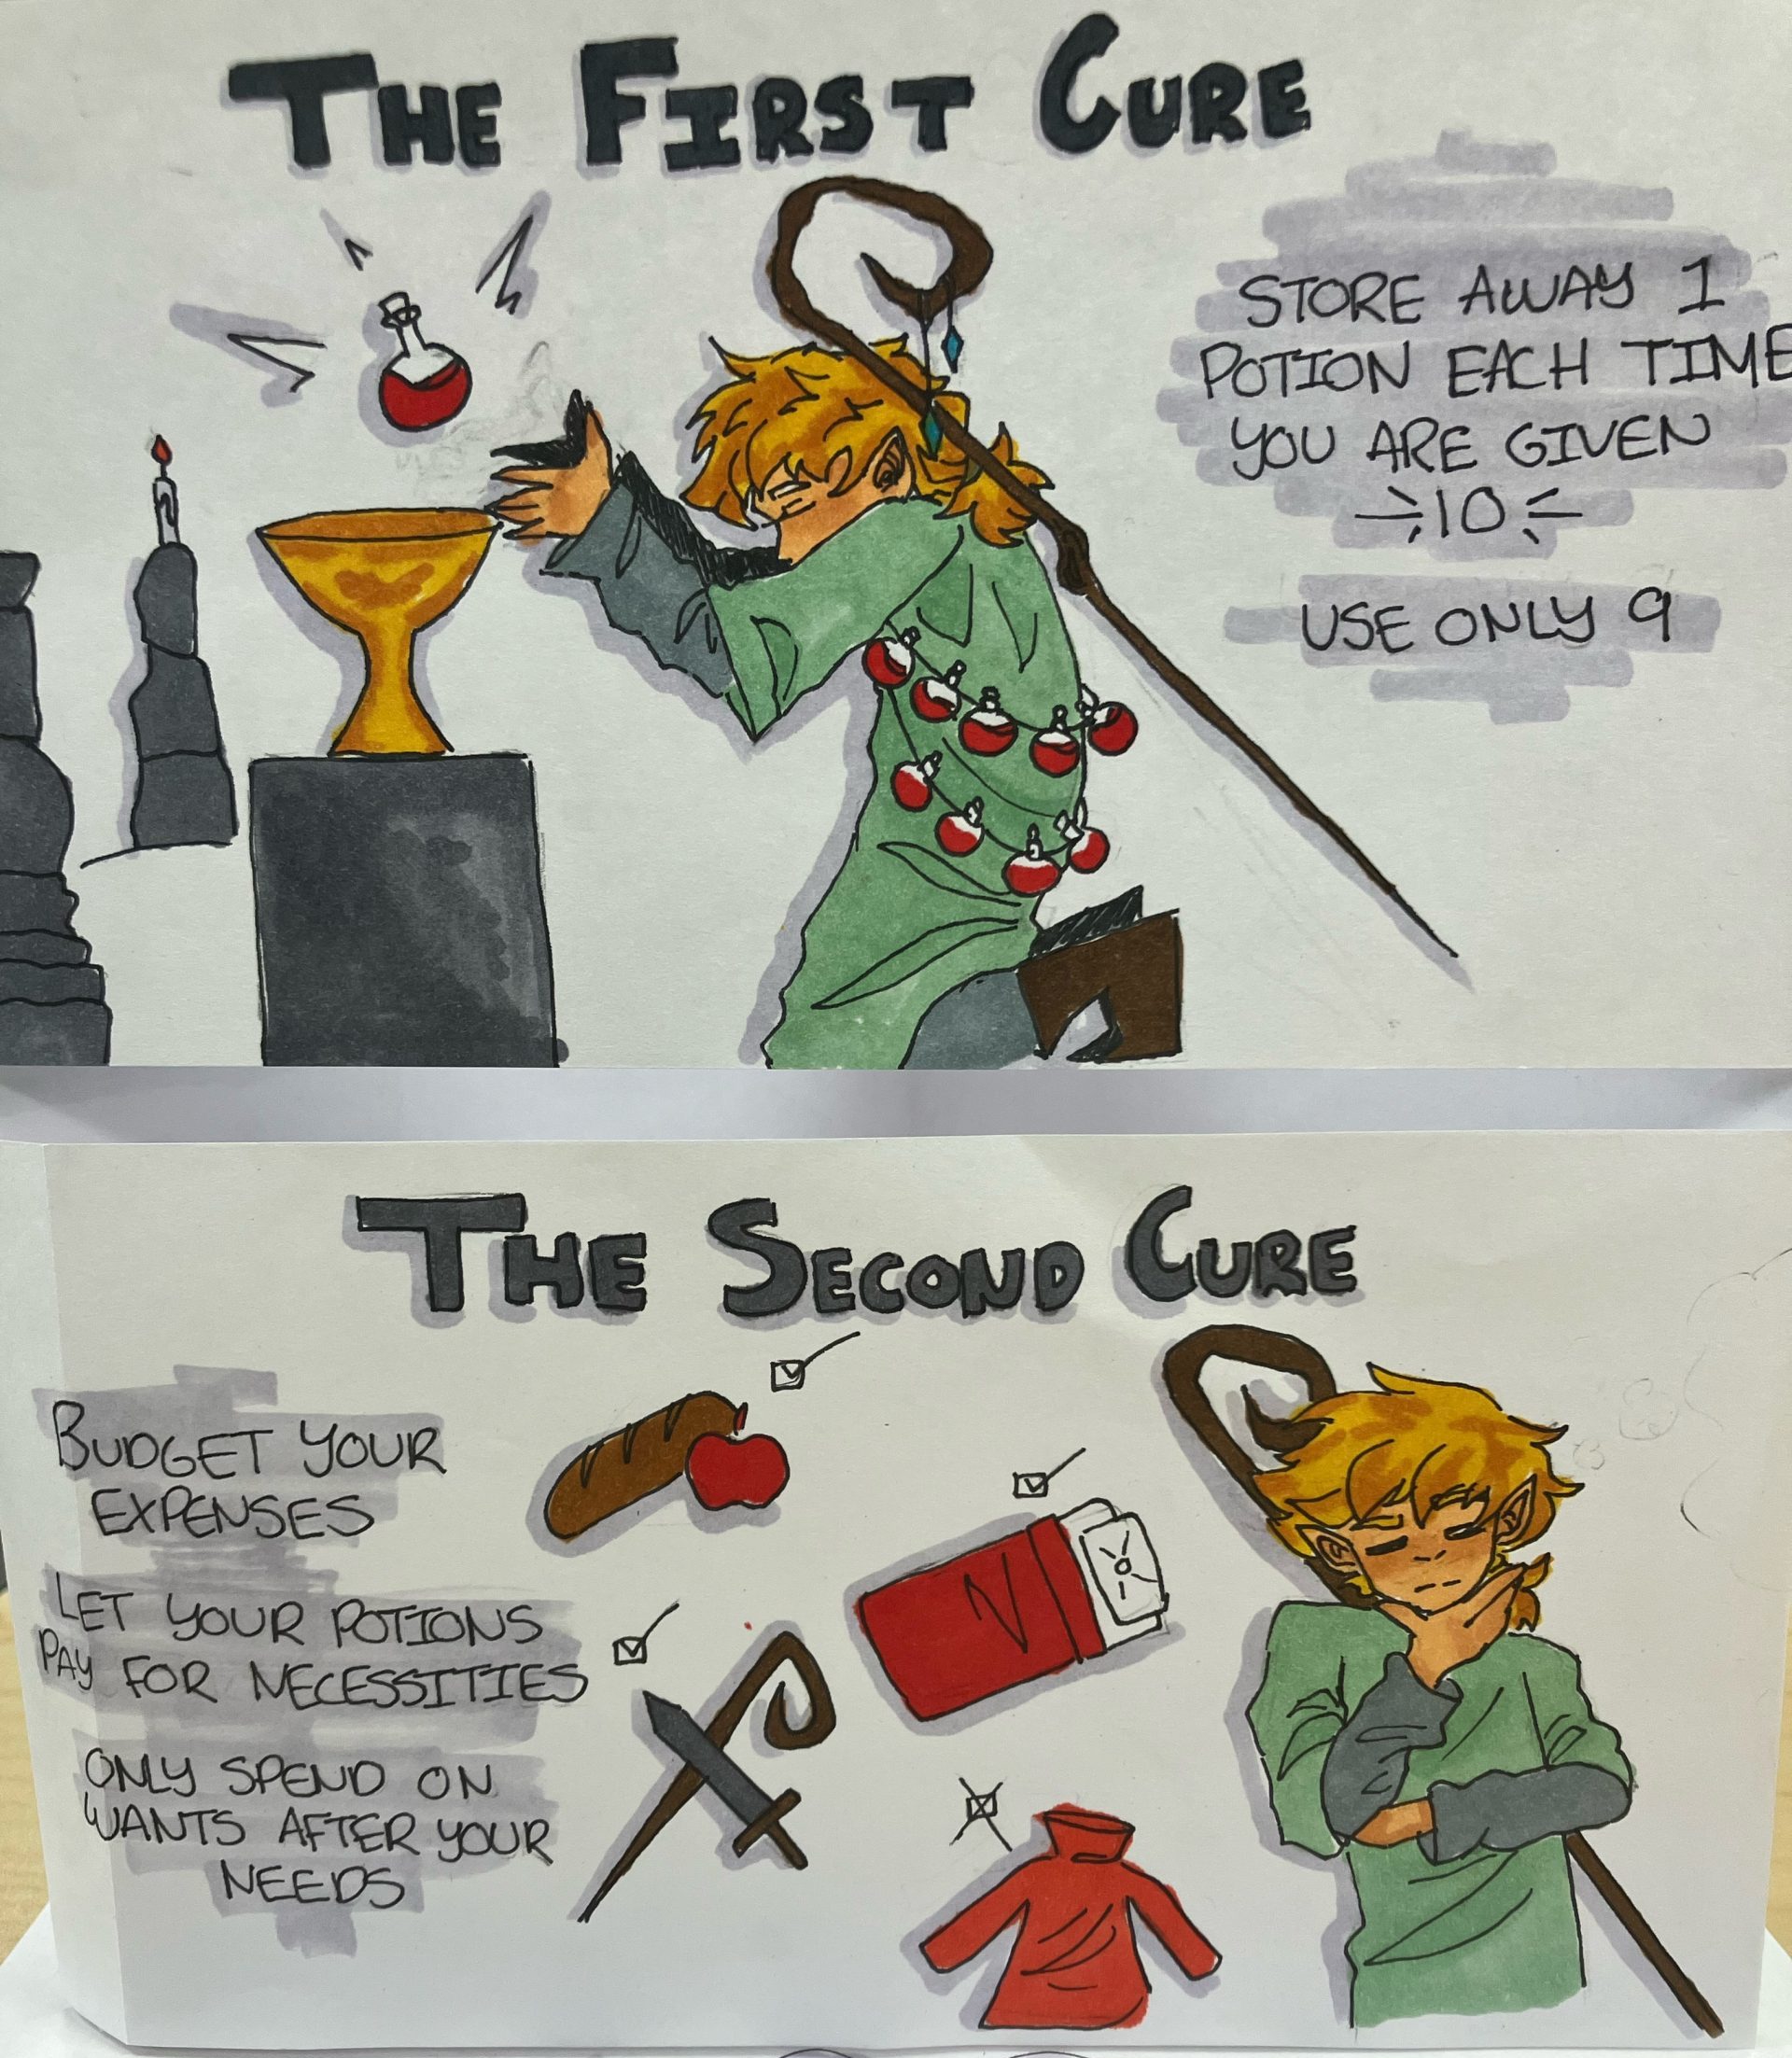 Photograph of student-created comic. The first panel shows a mage kneeling in front of a goblet with a potion hovering over it with the title "The First Cure" and the caption reading "store away 1 potion each time you are given 10. use only 9." The second panel, titled "the second cure" shows the same character in a contemplative pose next to a checklist of items, and includes the caption "budget your expenses , let your potions pay for necessities, only spend on wants after your needs."